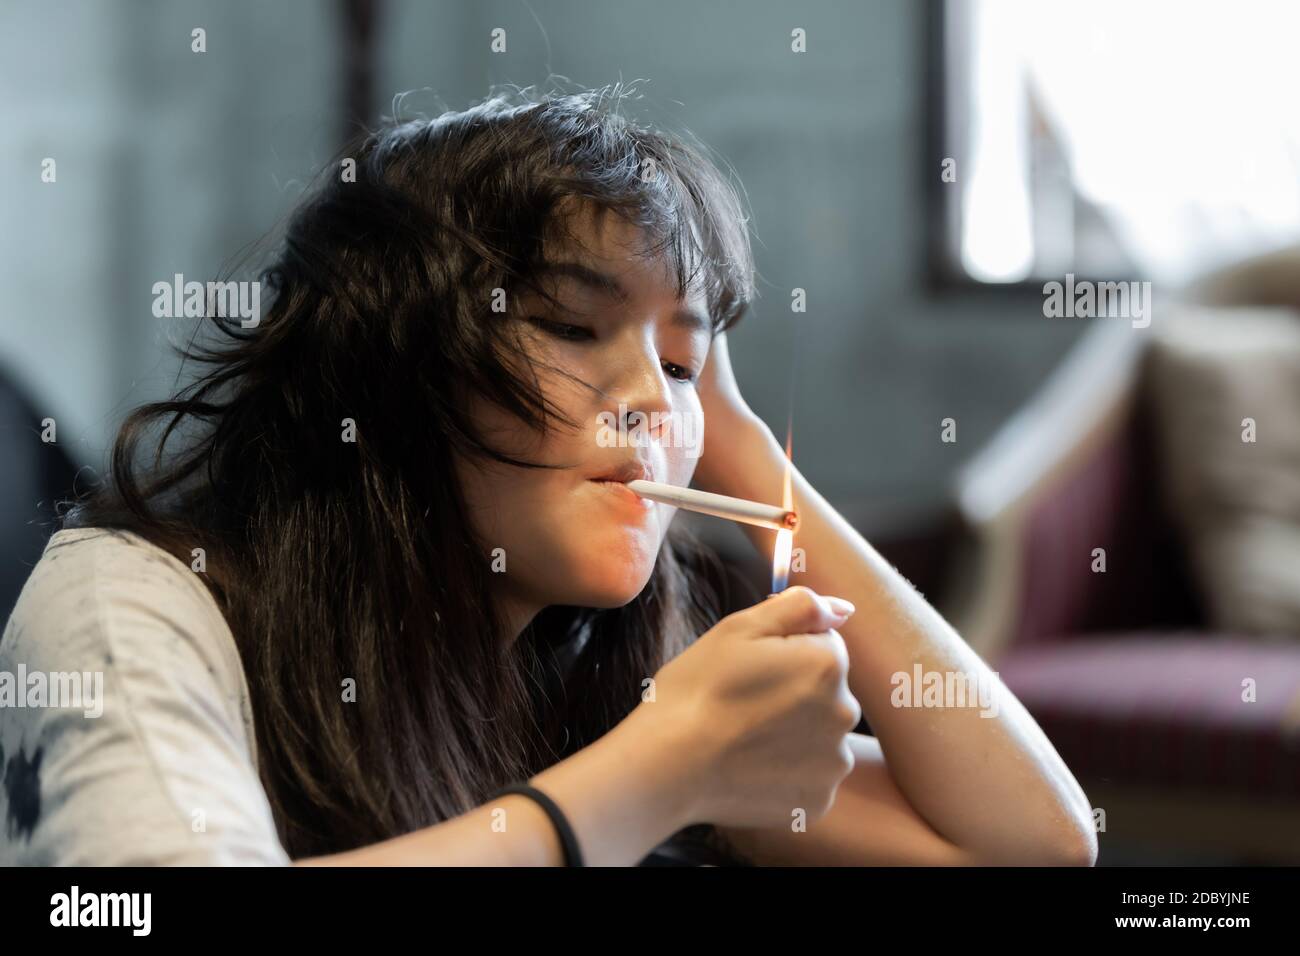 Asian Girl Smoking And Hopeless Concept Feeling Be Absent Minded Lonely Girl Concept Stock